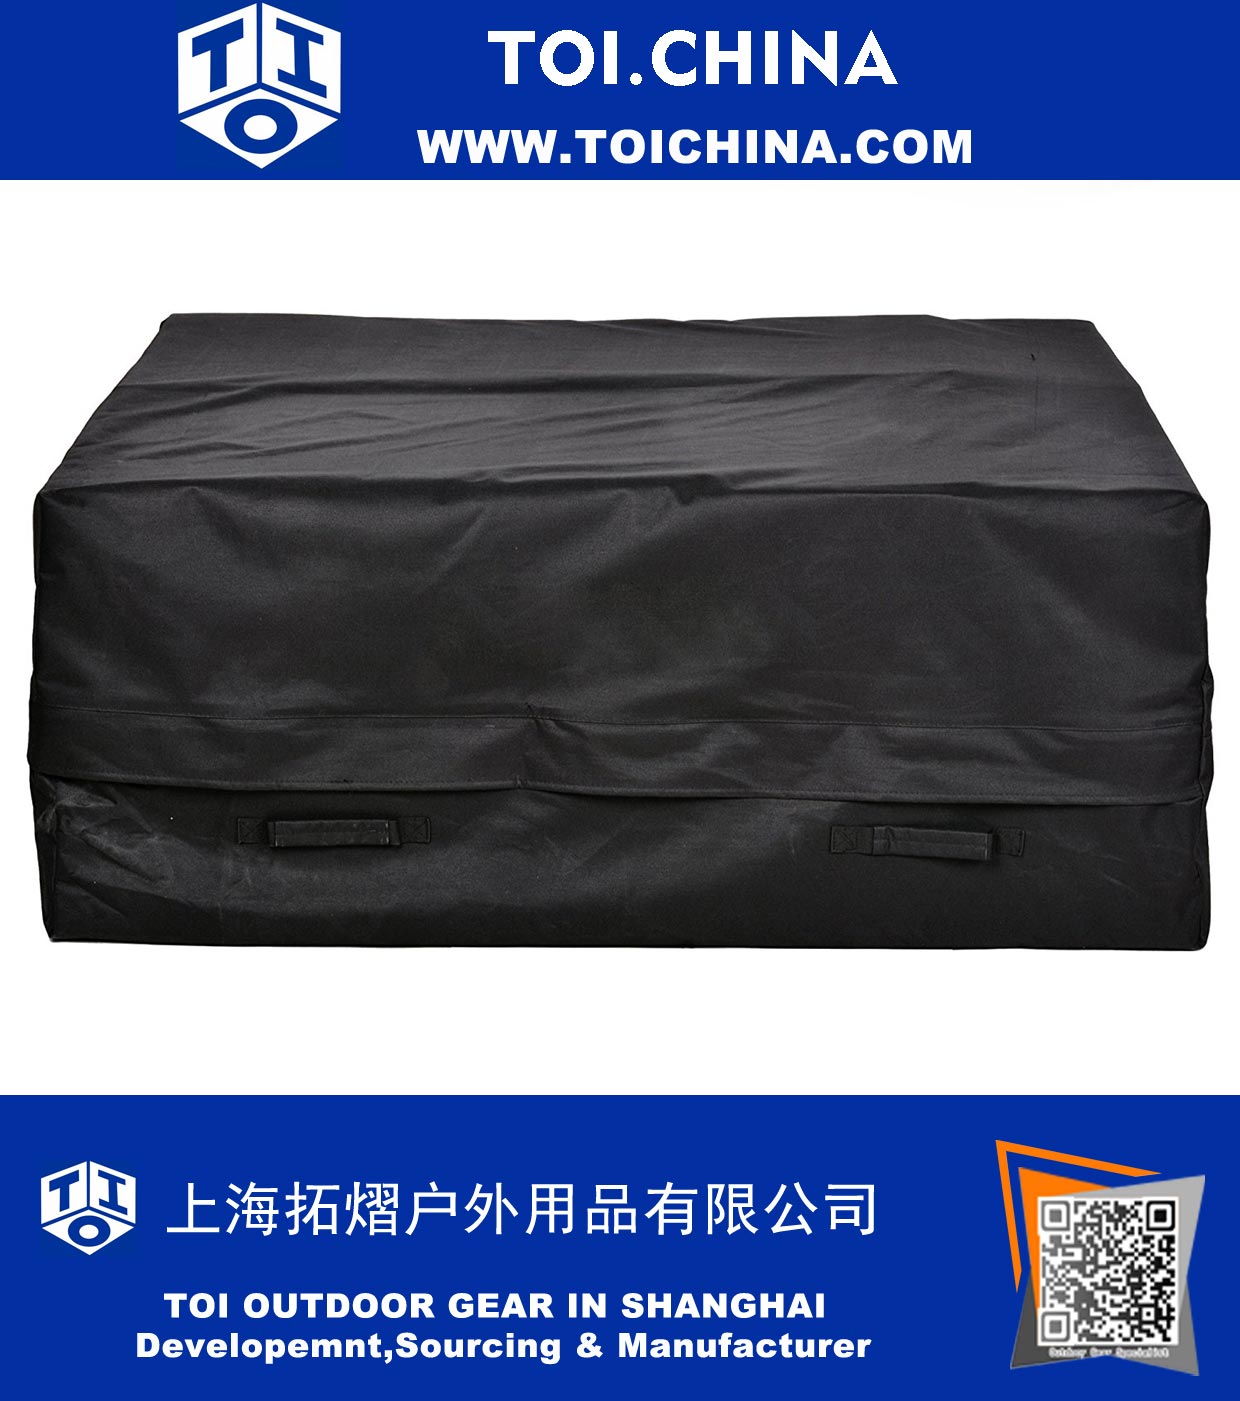 Car Roof Top Cargo Carrier Travel Bag, Rainproof Car Cargo Bag with Storage Sack,Waterproof Roof Top Cargo Bag for Cars, Vans and SUVs